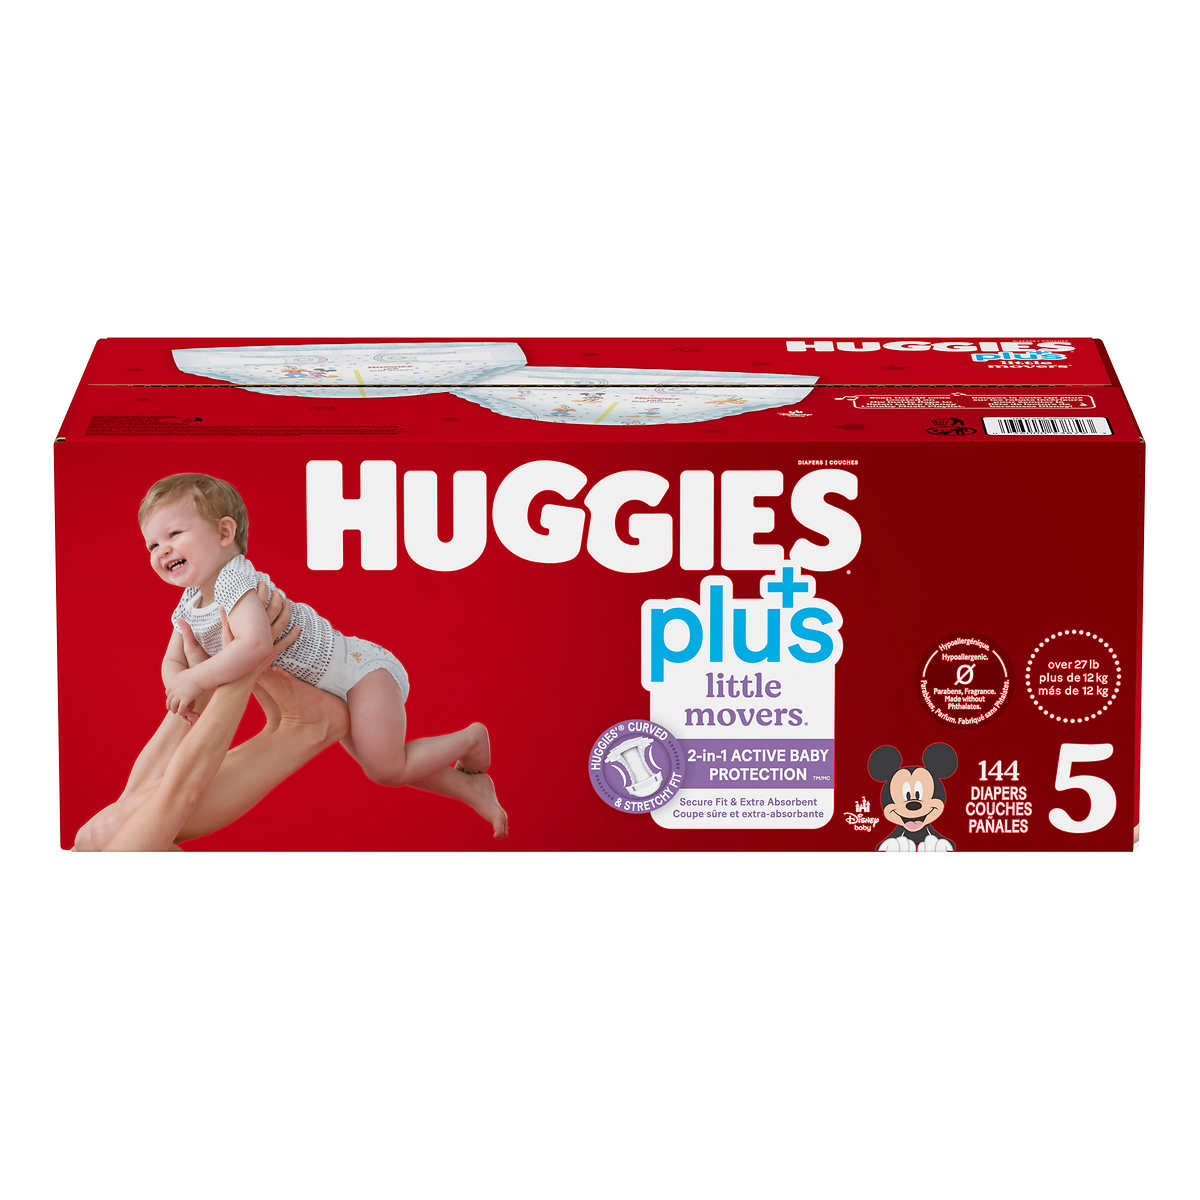 Huggies Little Movers Plus Diapers, Sizes 3 - 6